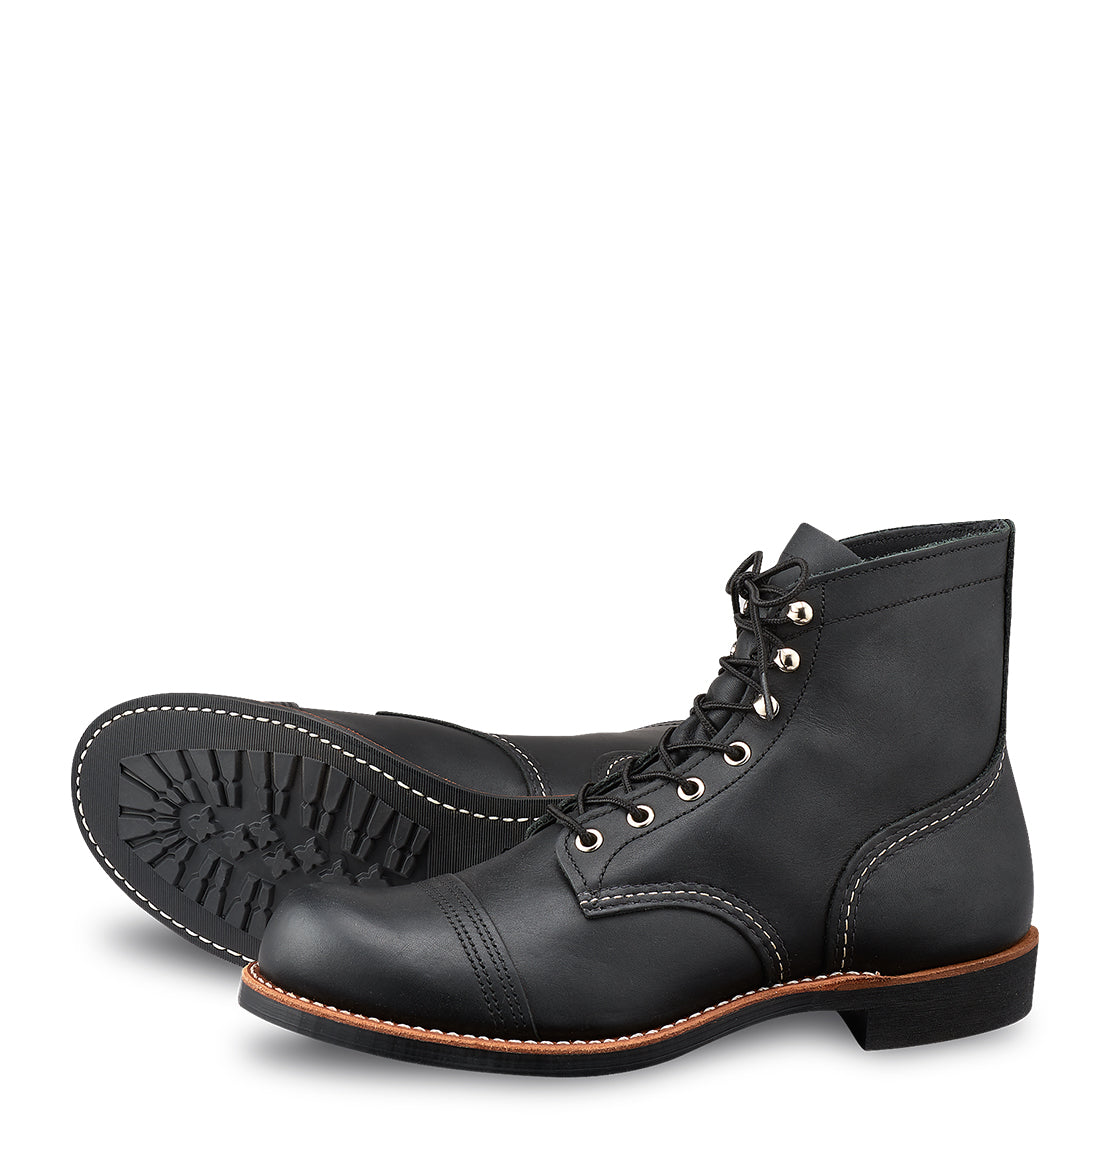 Red Wing Shoes - Iron Ranger - Black Harness 8084